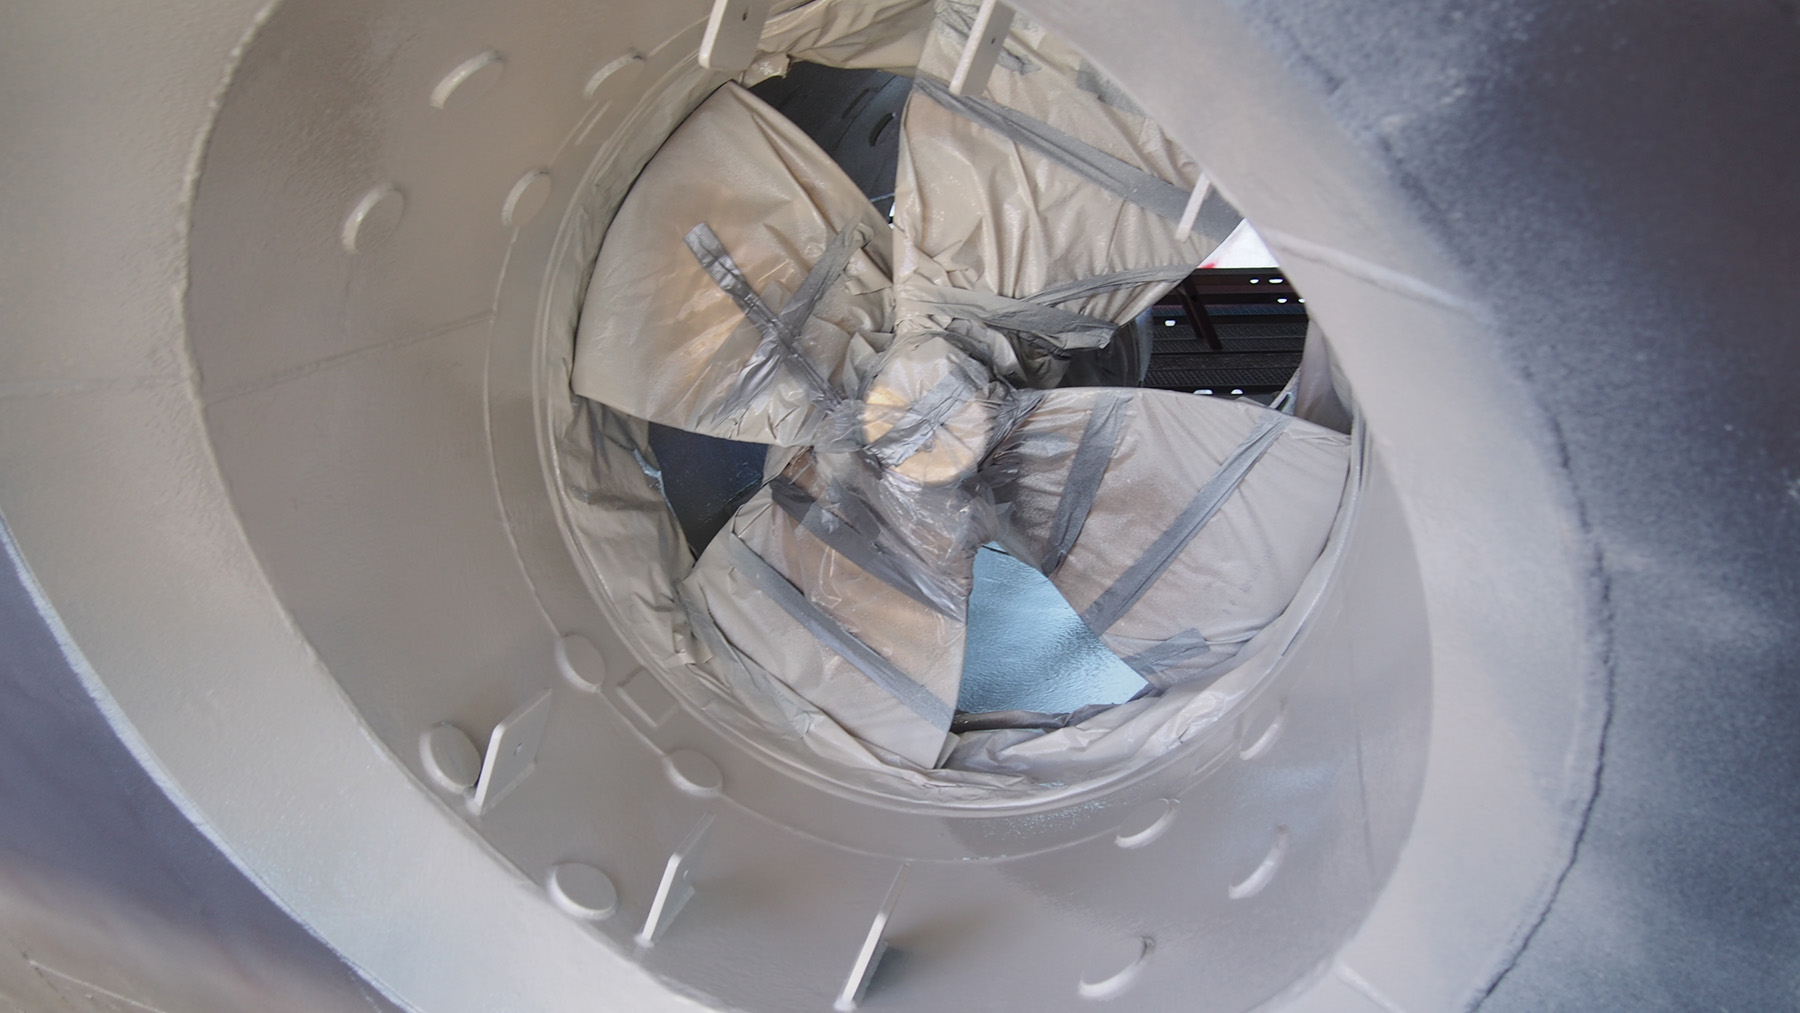 The thruster tunnel was coated with Ecoshield which is specifically designed to protect running gear.